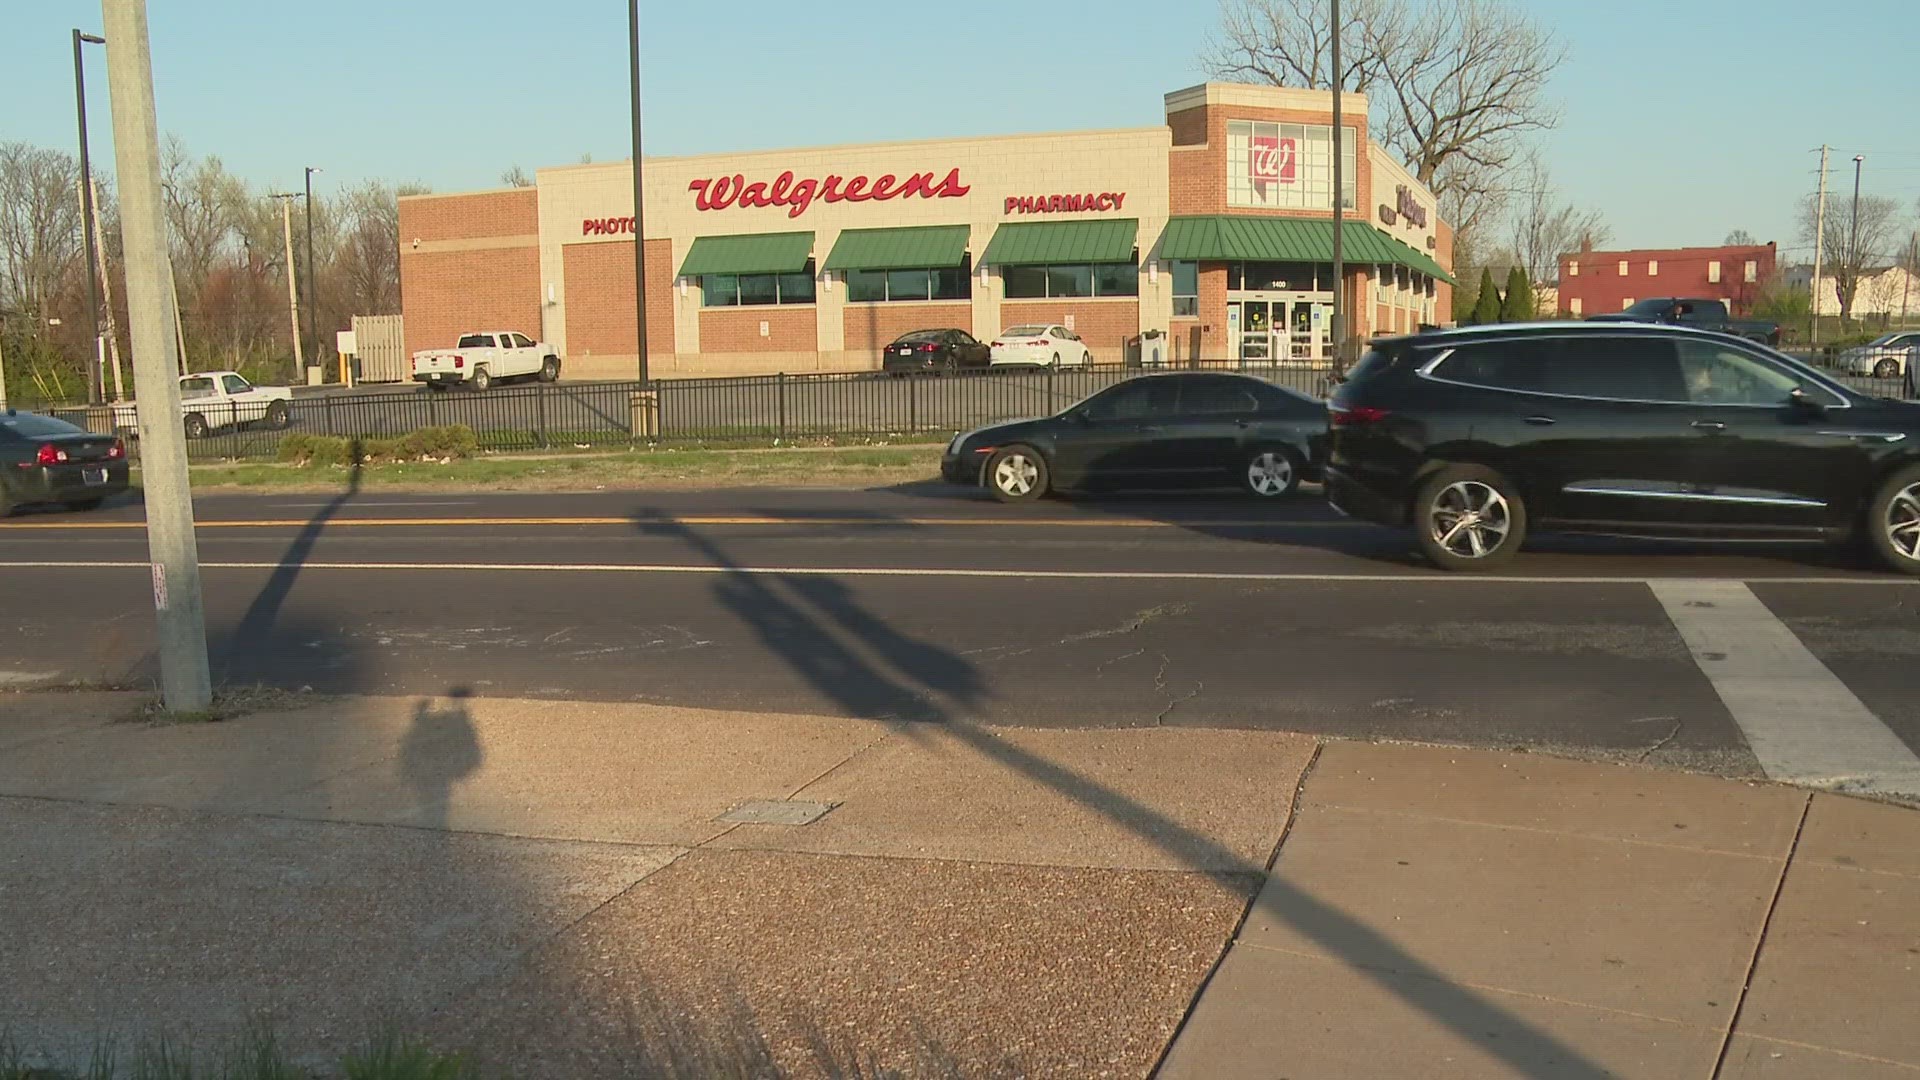 Walgreens' decision to close more than 150 stores nationwide is hitting home. Residents in a north city neighborhood say the news is already creating headaches.